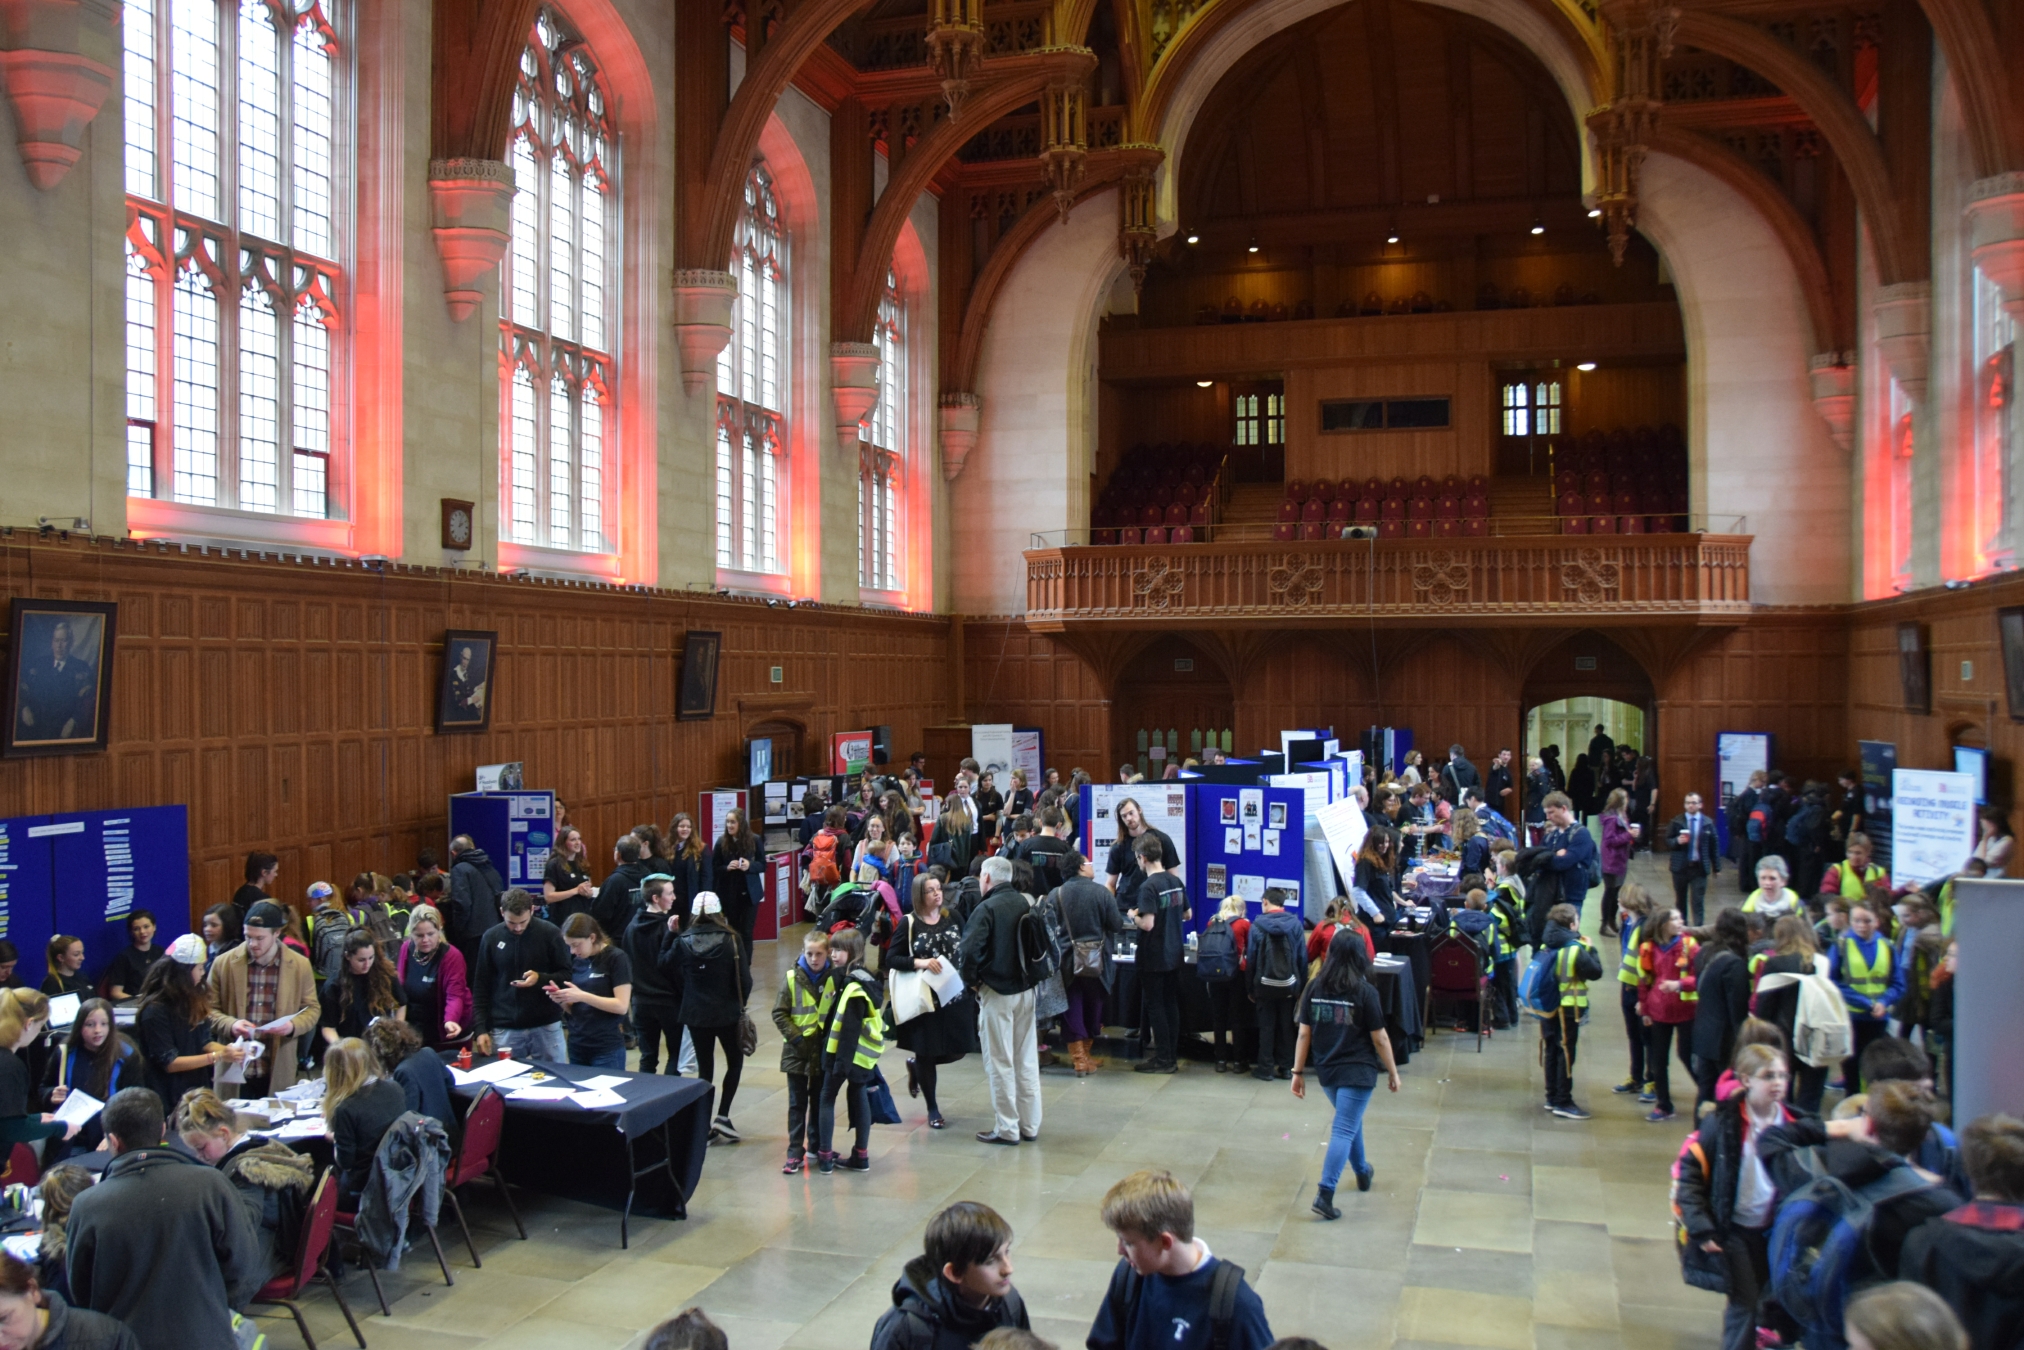 General view of the festival in Wills Memorial Building Great Hall, University of Bristol